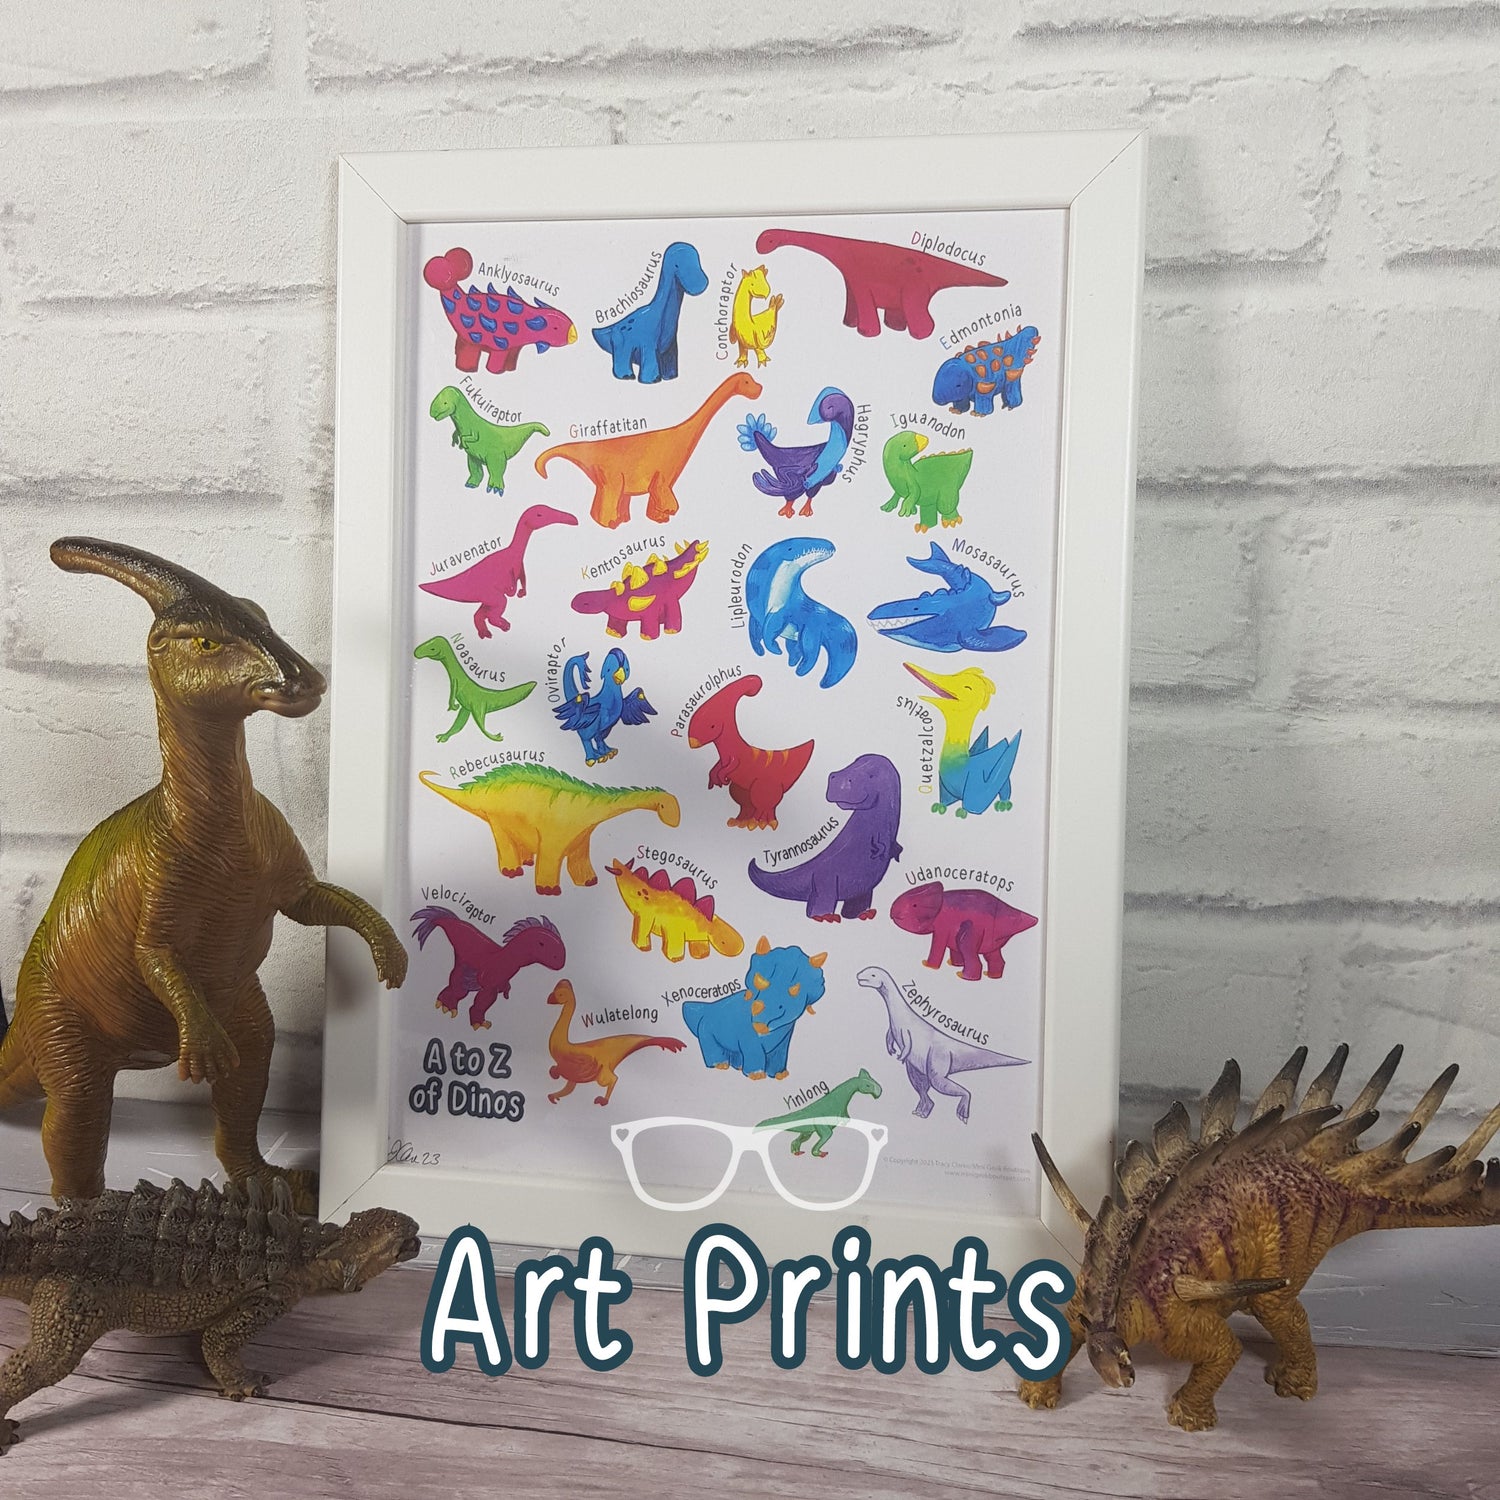 A framed A to Z of dinosaurs art print with Derek, Irene and Hank looking proud